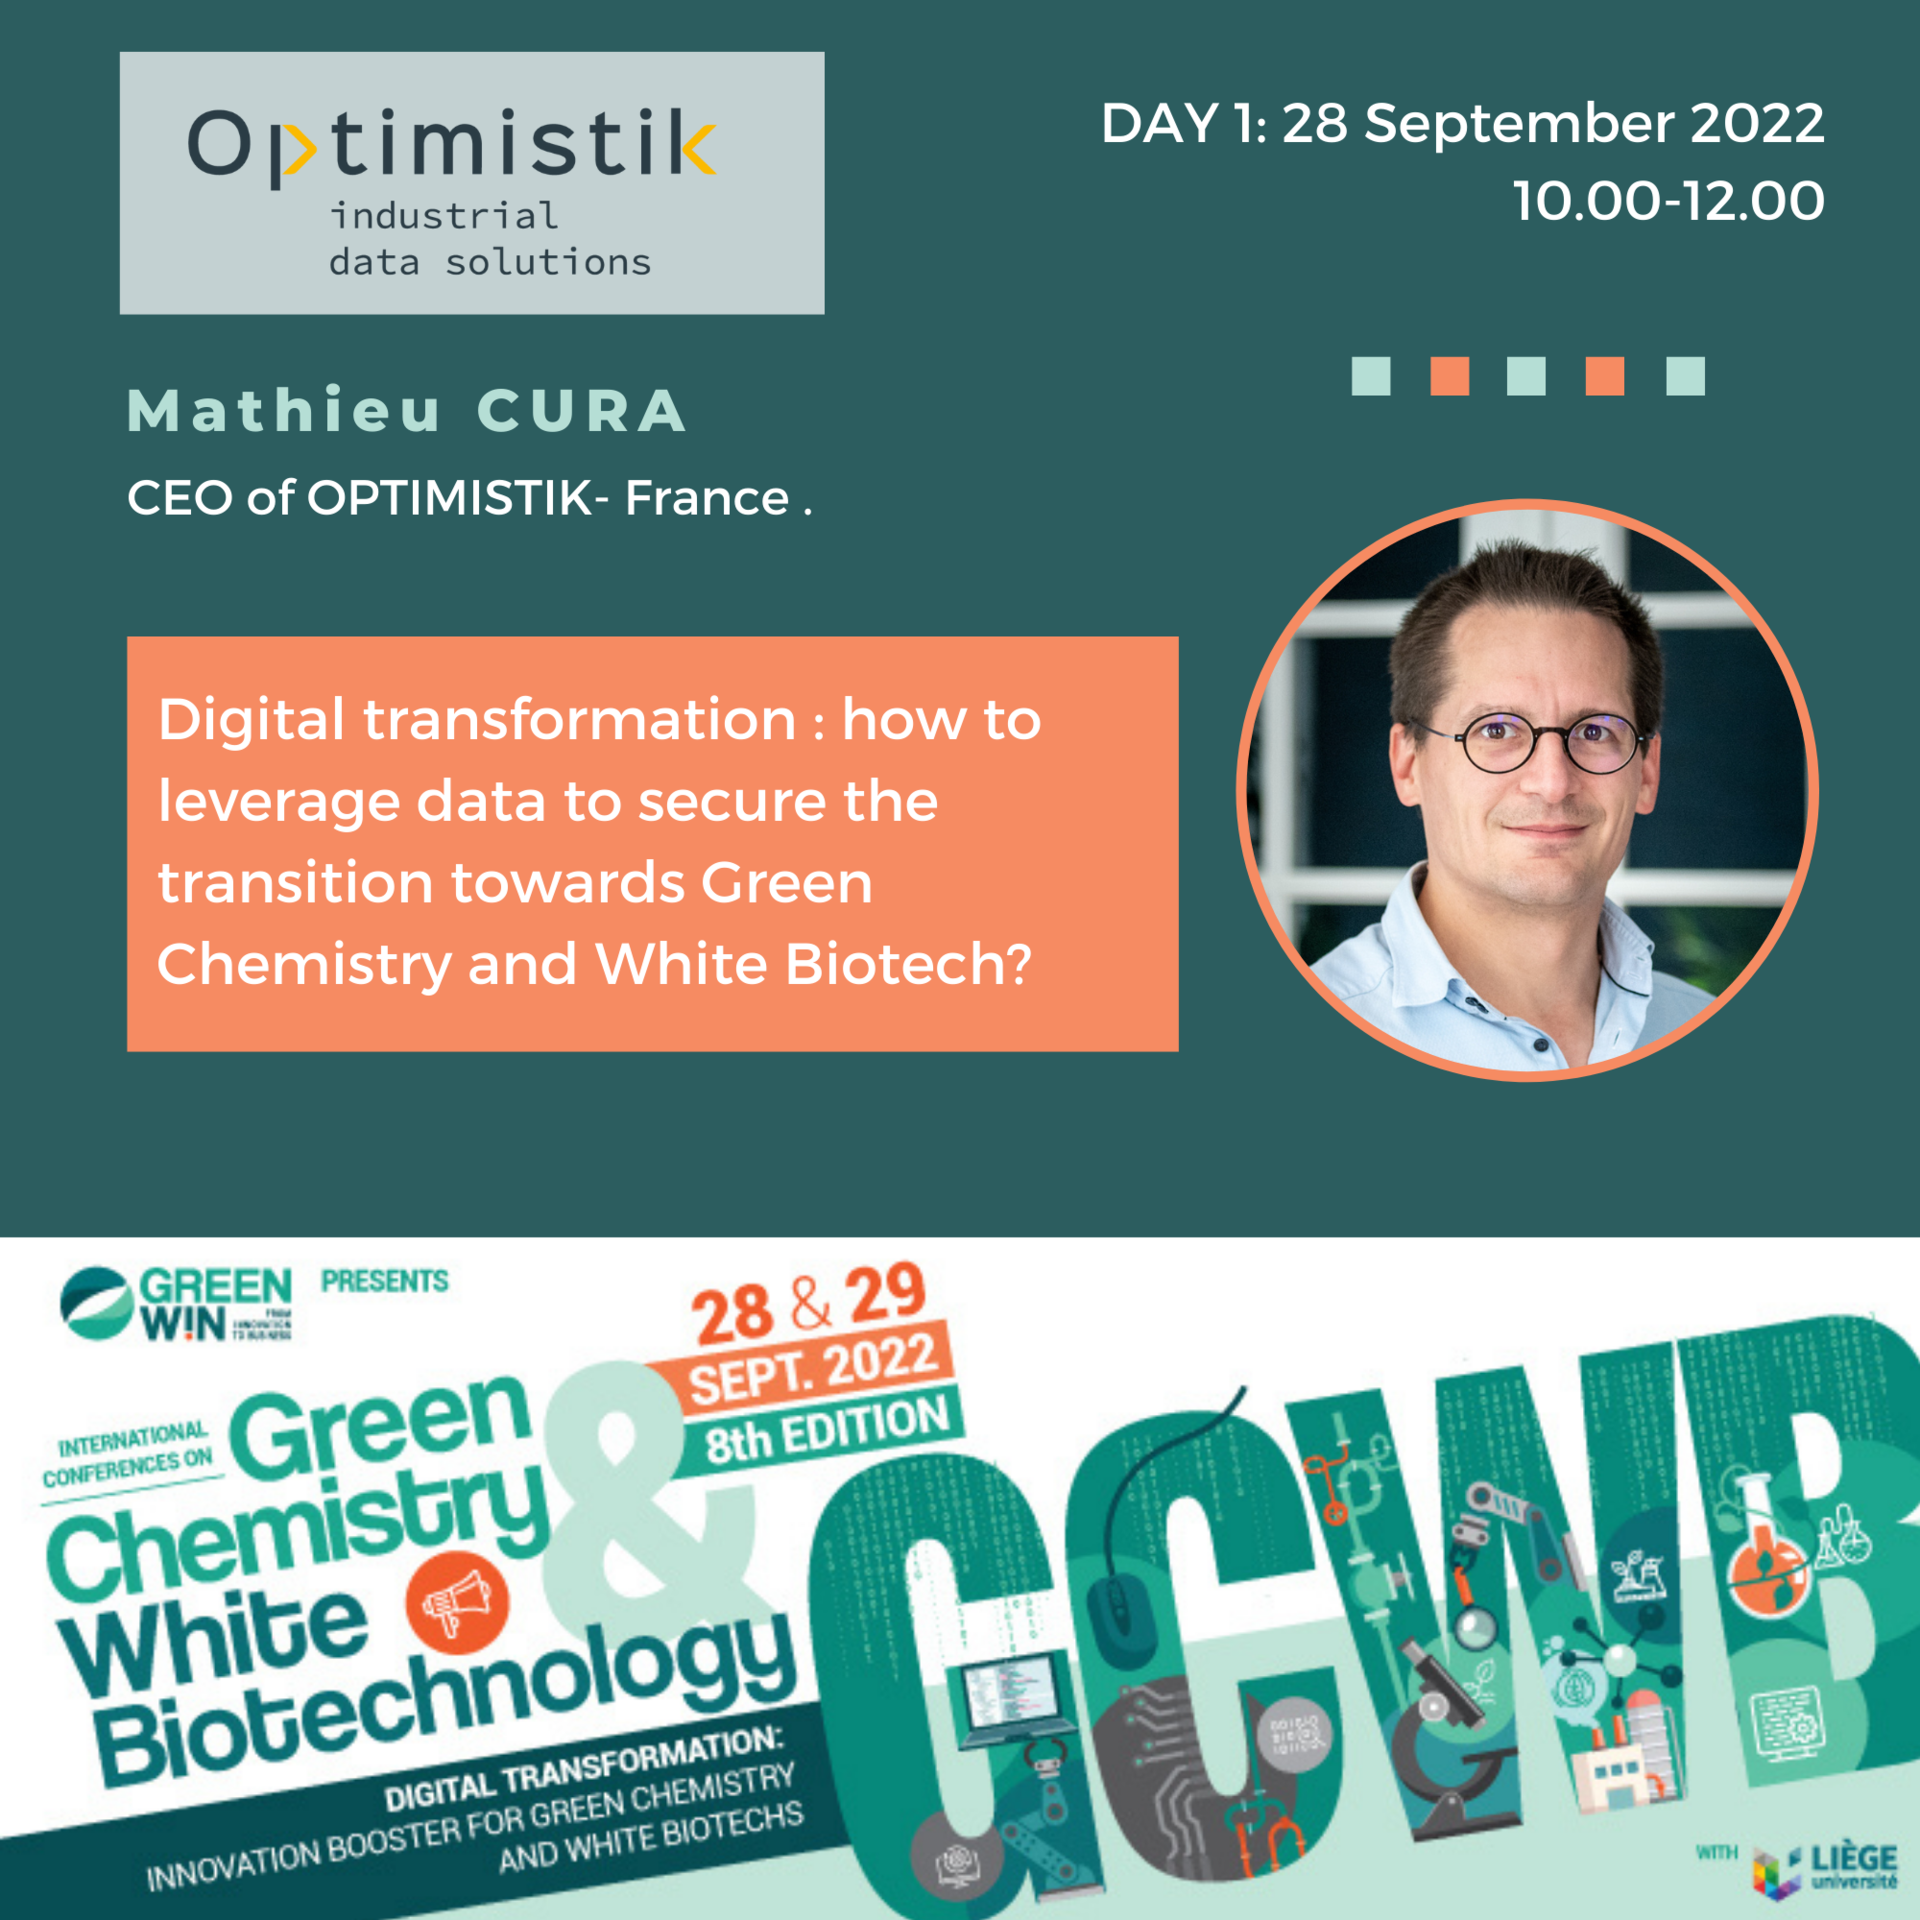 Want to know how to leverage data to secure your corporate's transition towards green chemistry and white biotech, through Digital Transformation?